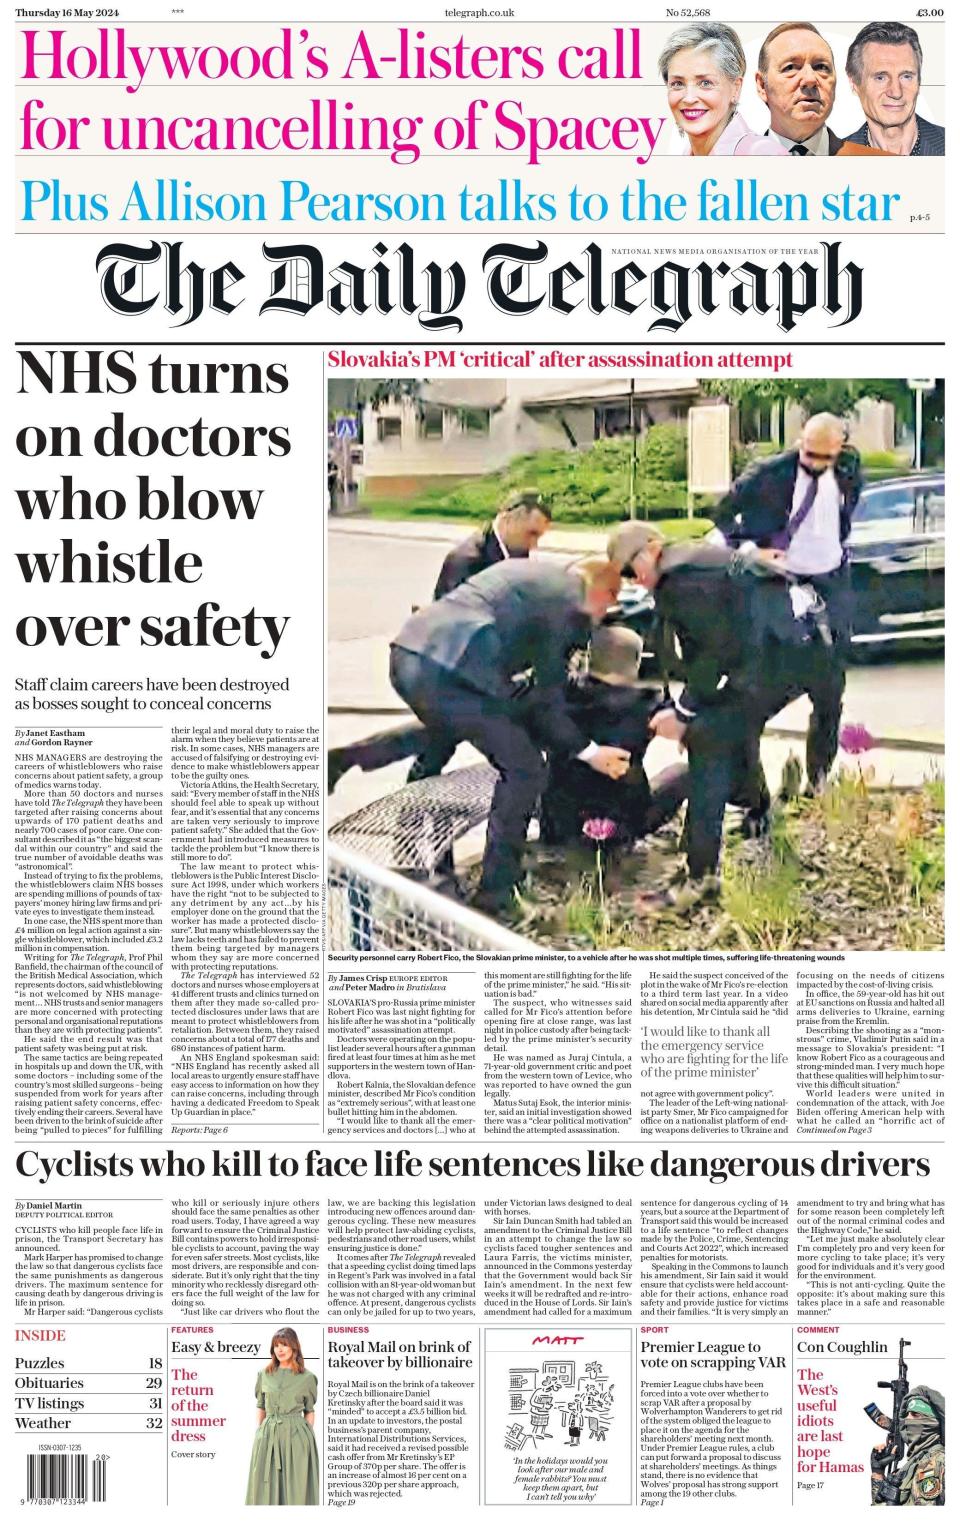 Daily Telegraph: NHS bosses destroy careers of whistleblowers who stand up to protect patients’ lives